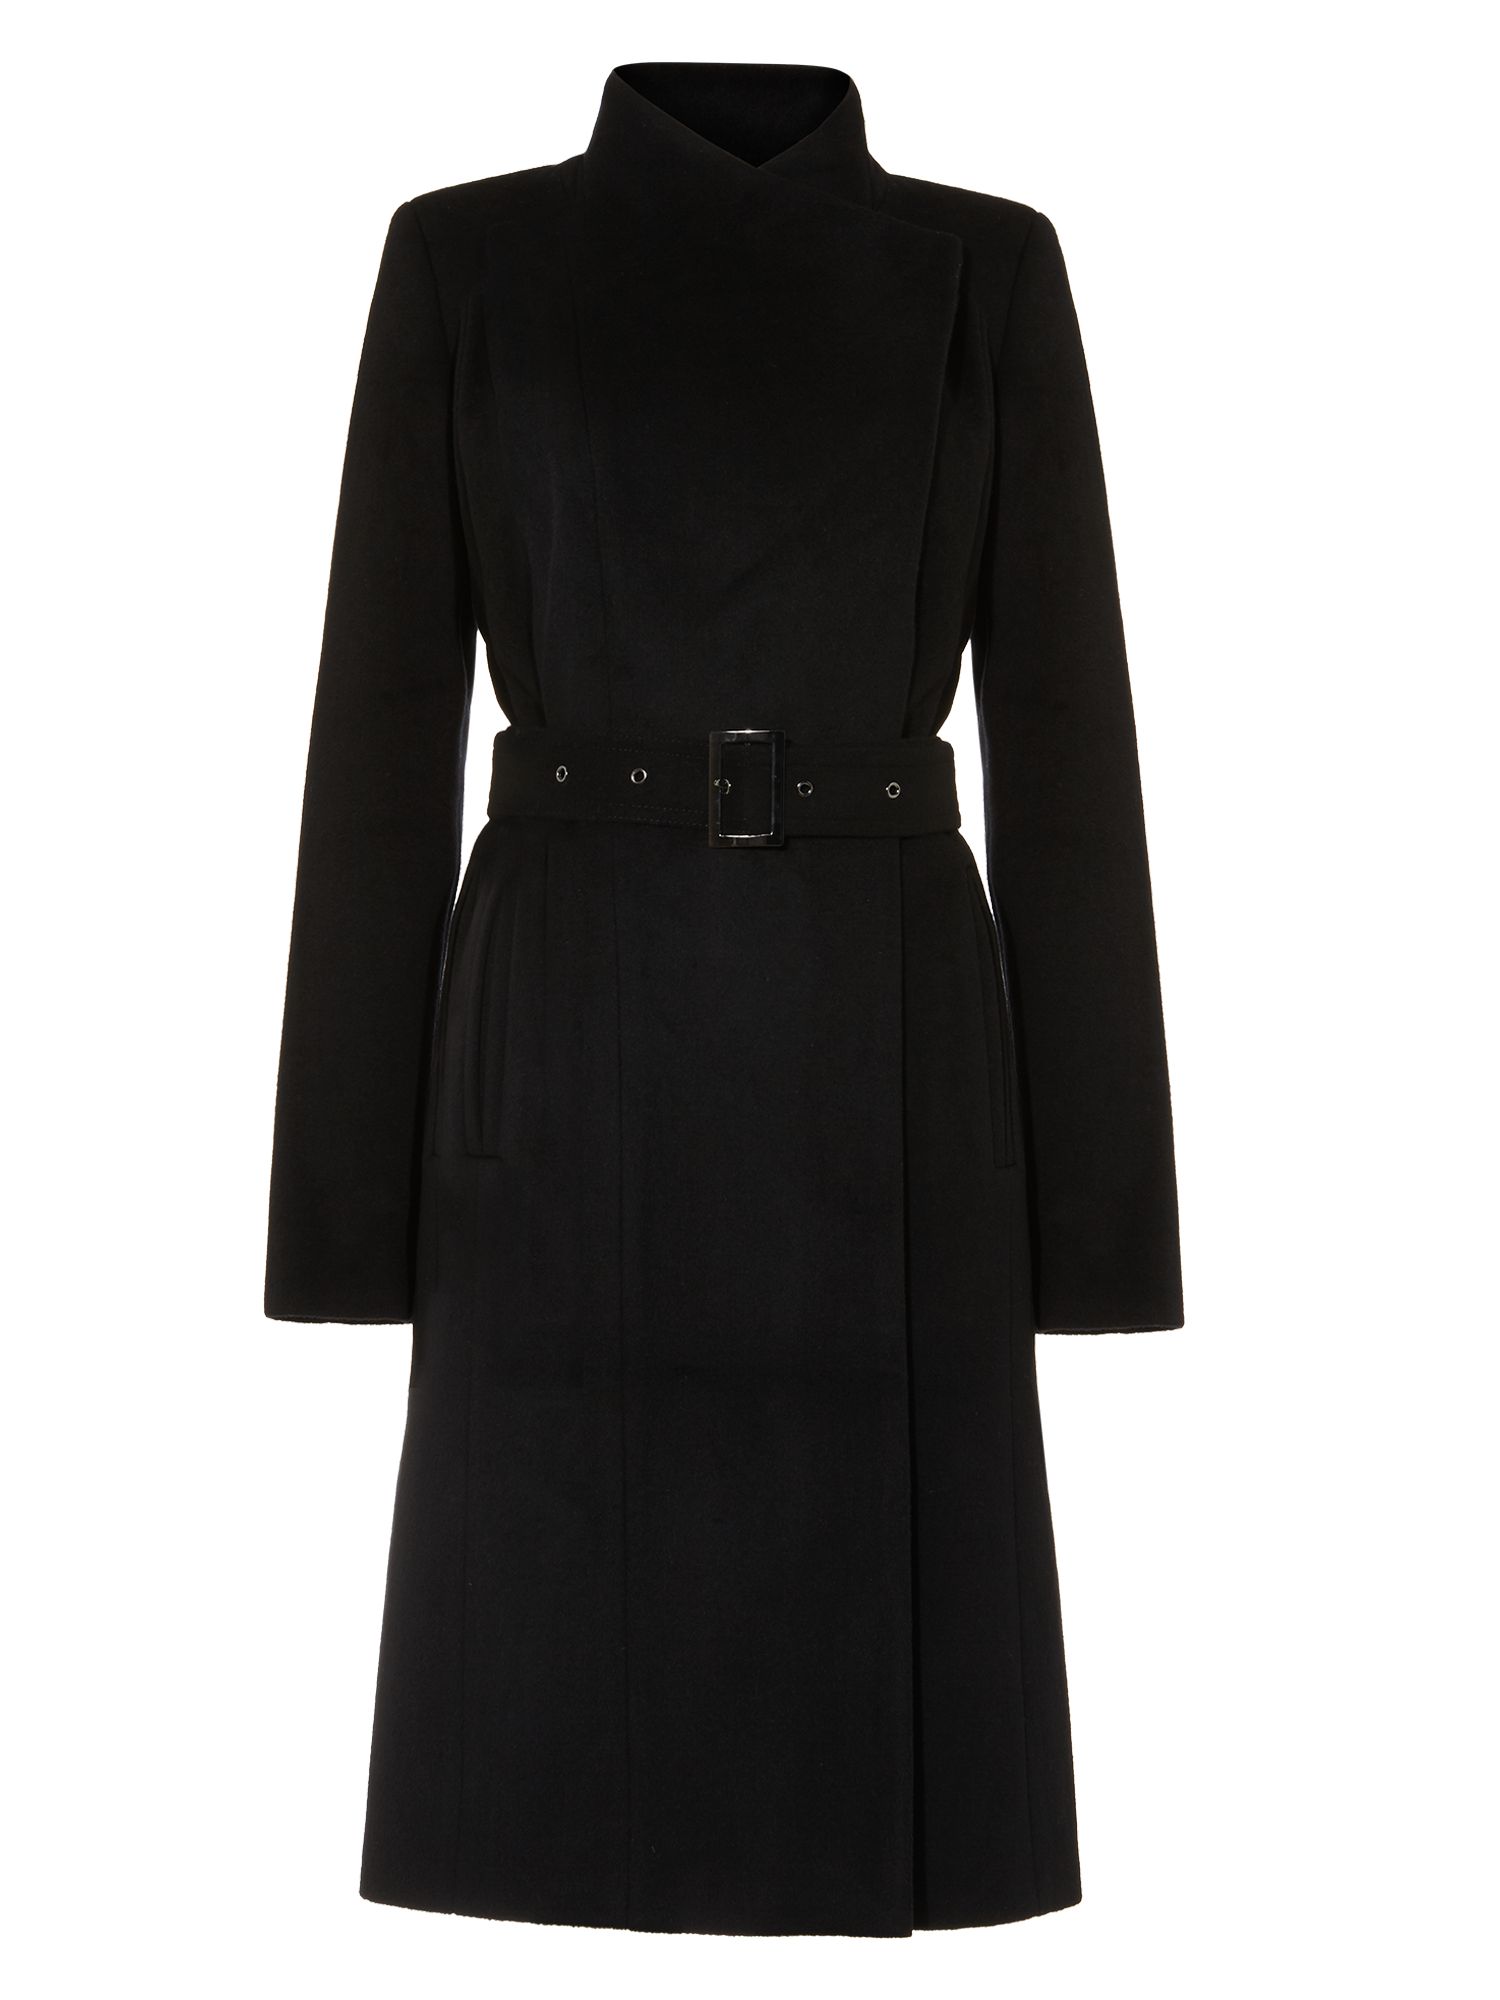 Phase Eight Darby Wrap Coat, Black at John Lewis & Partners